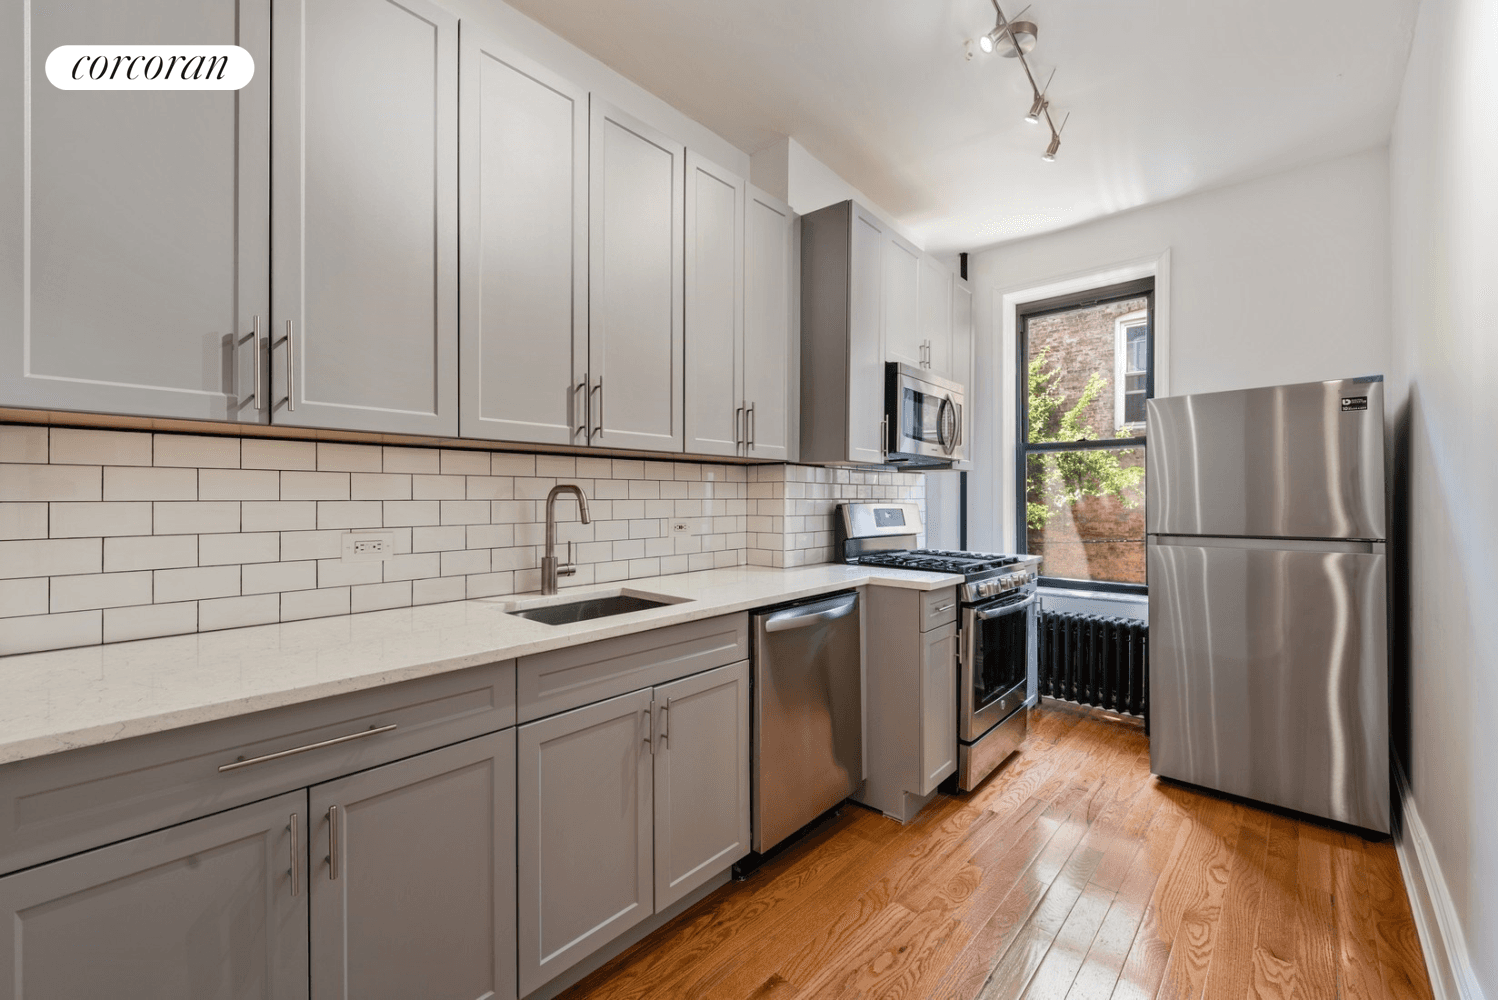 632 CENTRAL AVENUE APARTMENT 2 BUSHWICK BROOKLYNRENOVATED D W HIGH CEILINGS W D STORAGE INCLUDEDThis is a tremendous opportunity to lease this quiet and newly renovated 3 bedroom 1 bath ...